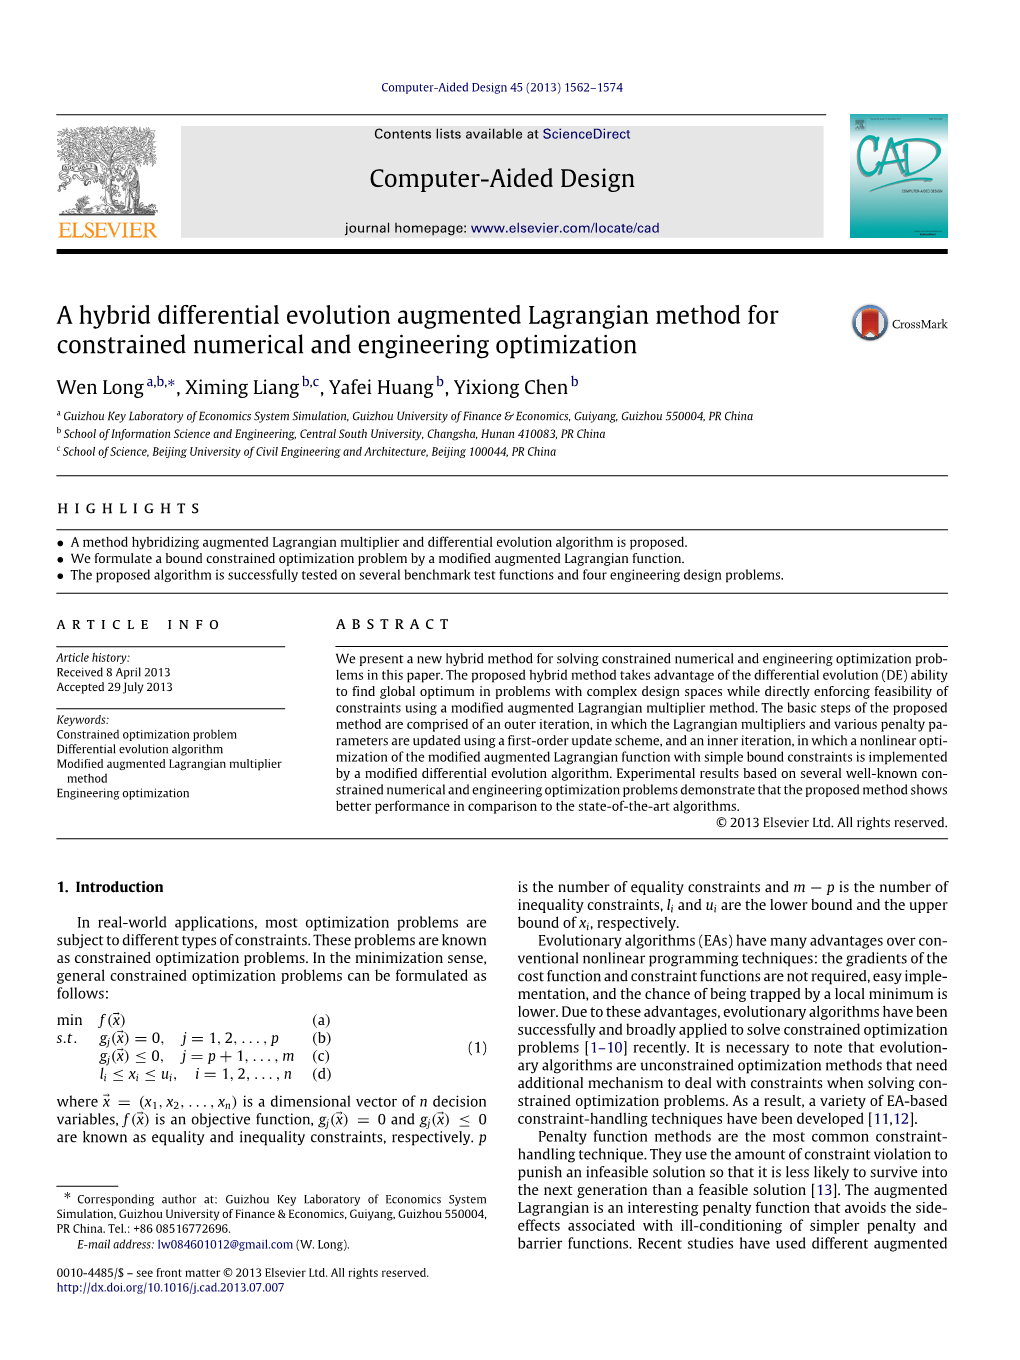 A Hybrid Differential Evolution Augmented Lagrangian Method for Constrained Numerical and Engineering Optimization